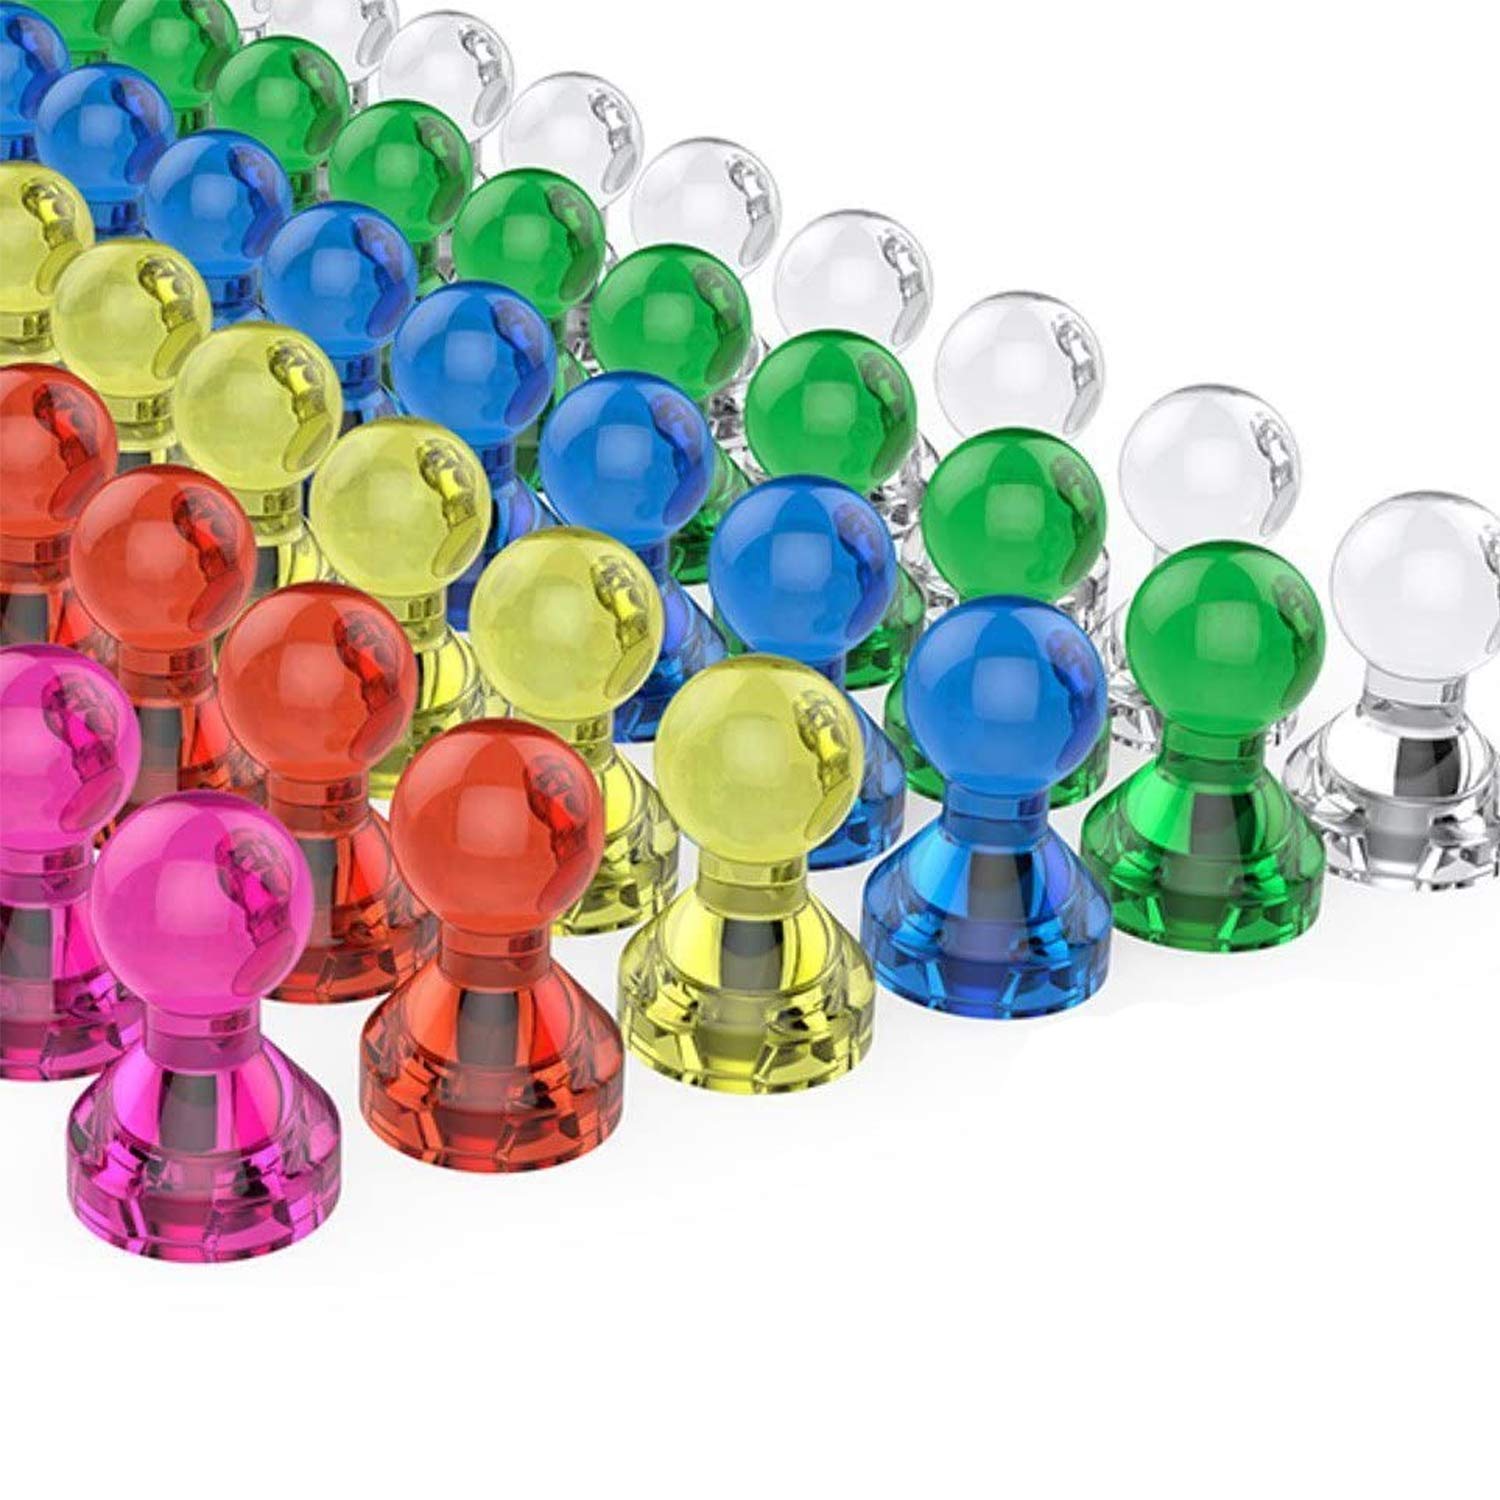 Strong Magnetic Push Pins - 7 Assorted Color LifeKrafts